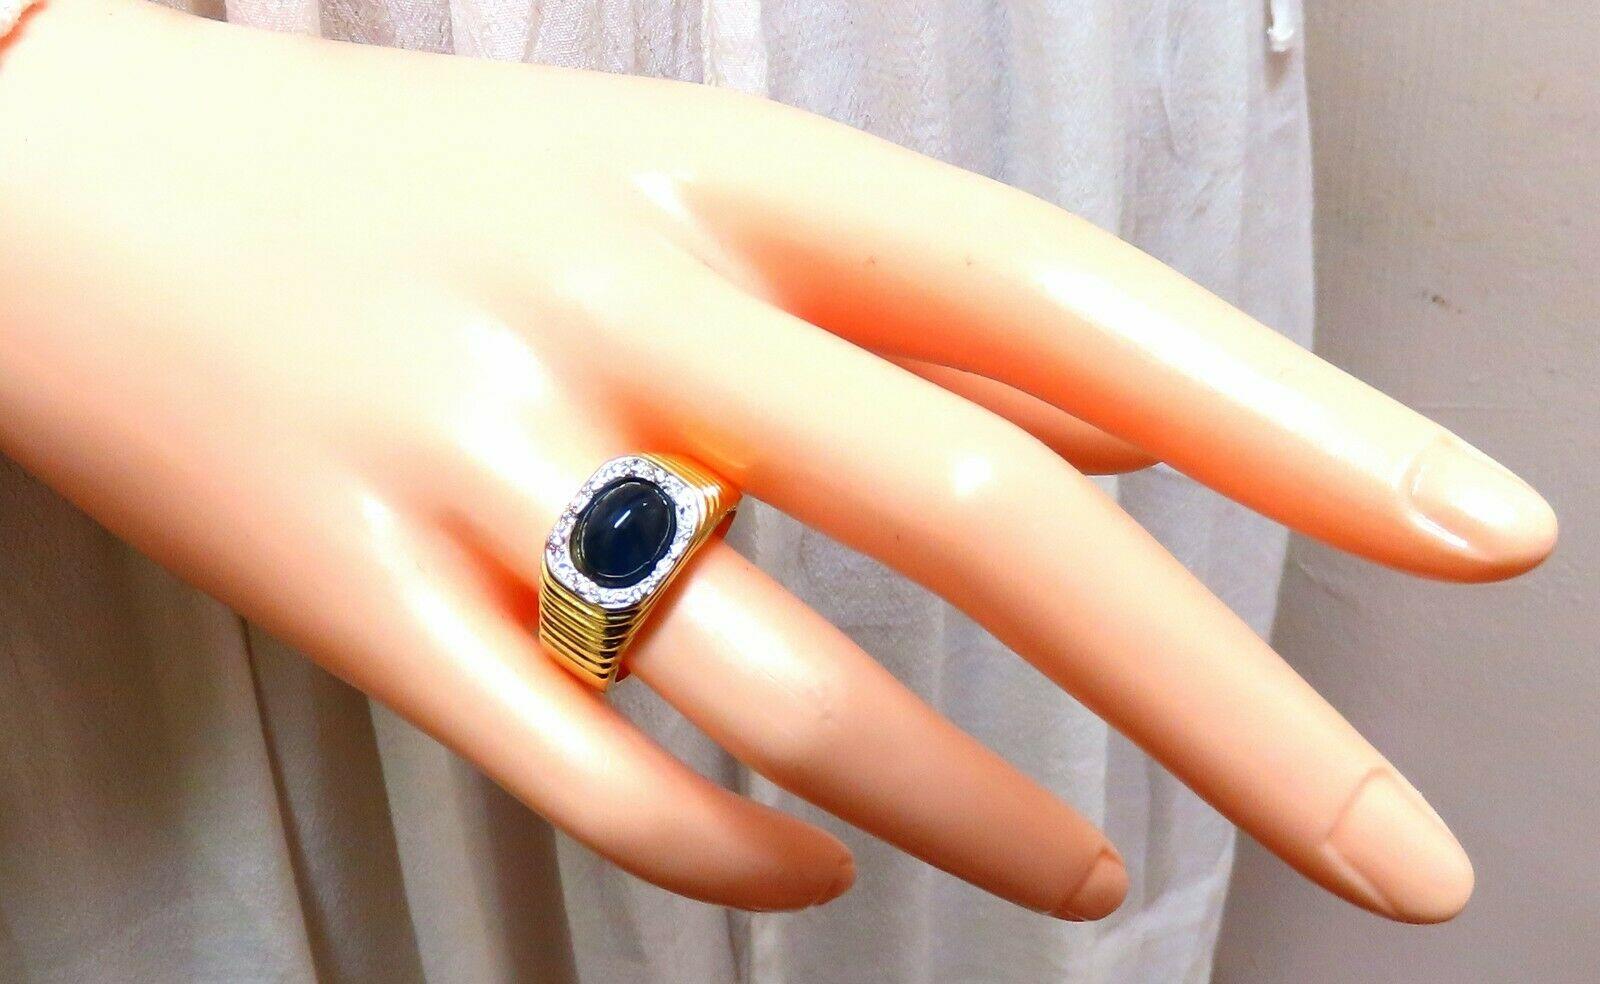 Vintage Cabochon Sapphire Diamonds Ring

3.00ct. Natural Blue Sapphire

9 X 6.5mm diameter

Midnight Blue Color

.20ct. Diamonds.

H-color Vs-2 clarity.

  14kt. yellow gold

12.1 grams

Ring Current size: 7.75

(Free Resize Service, Please